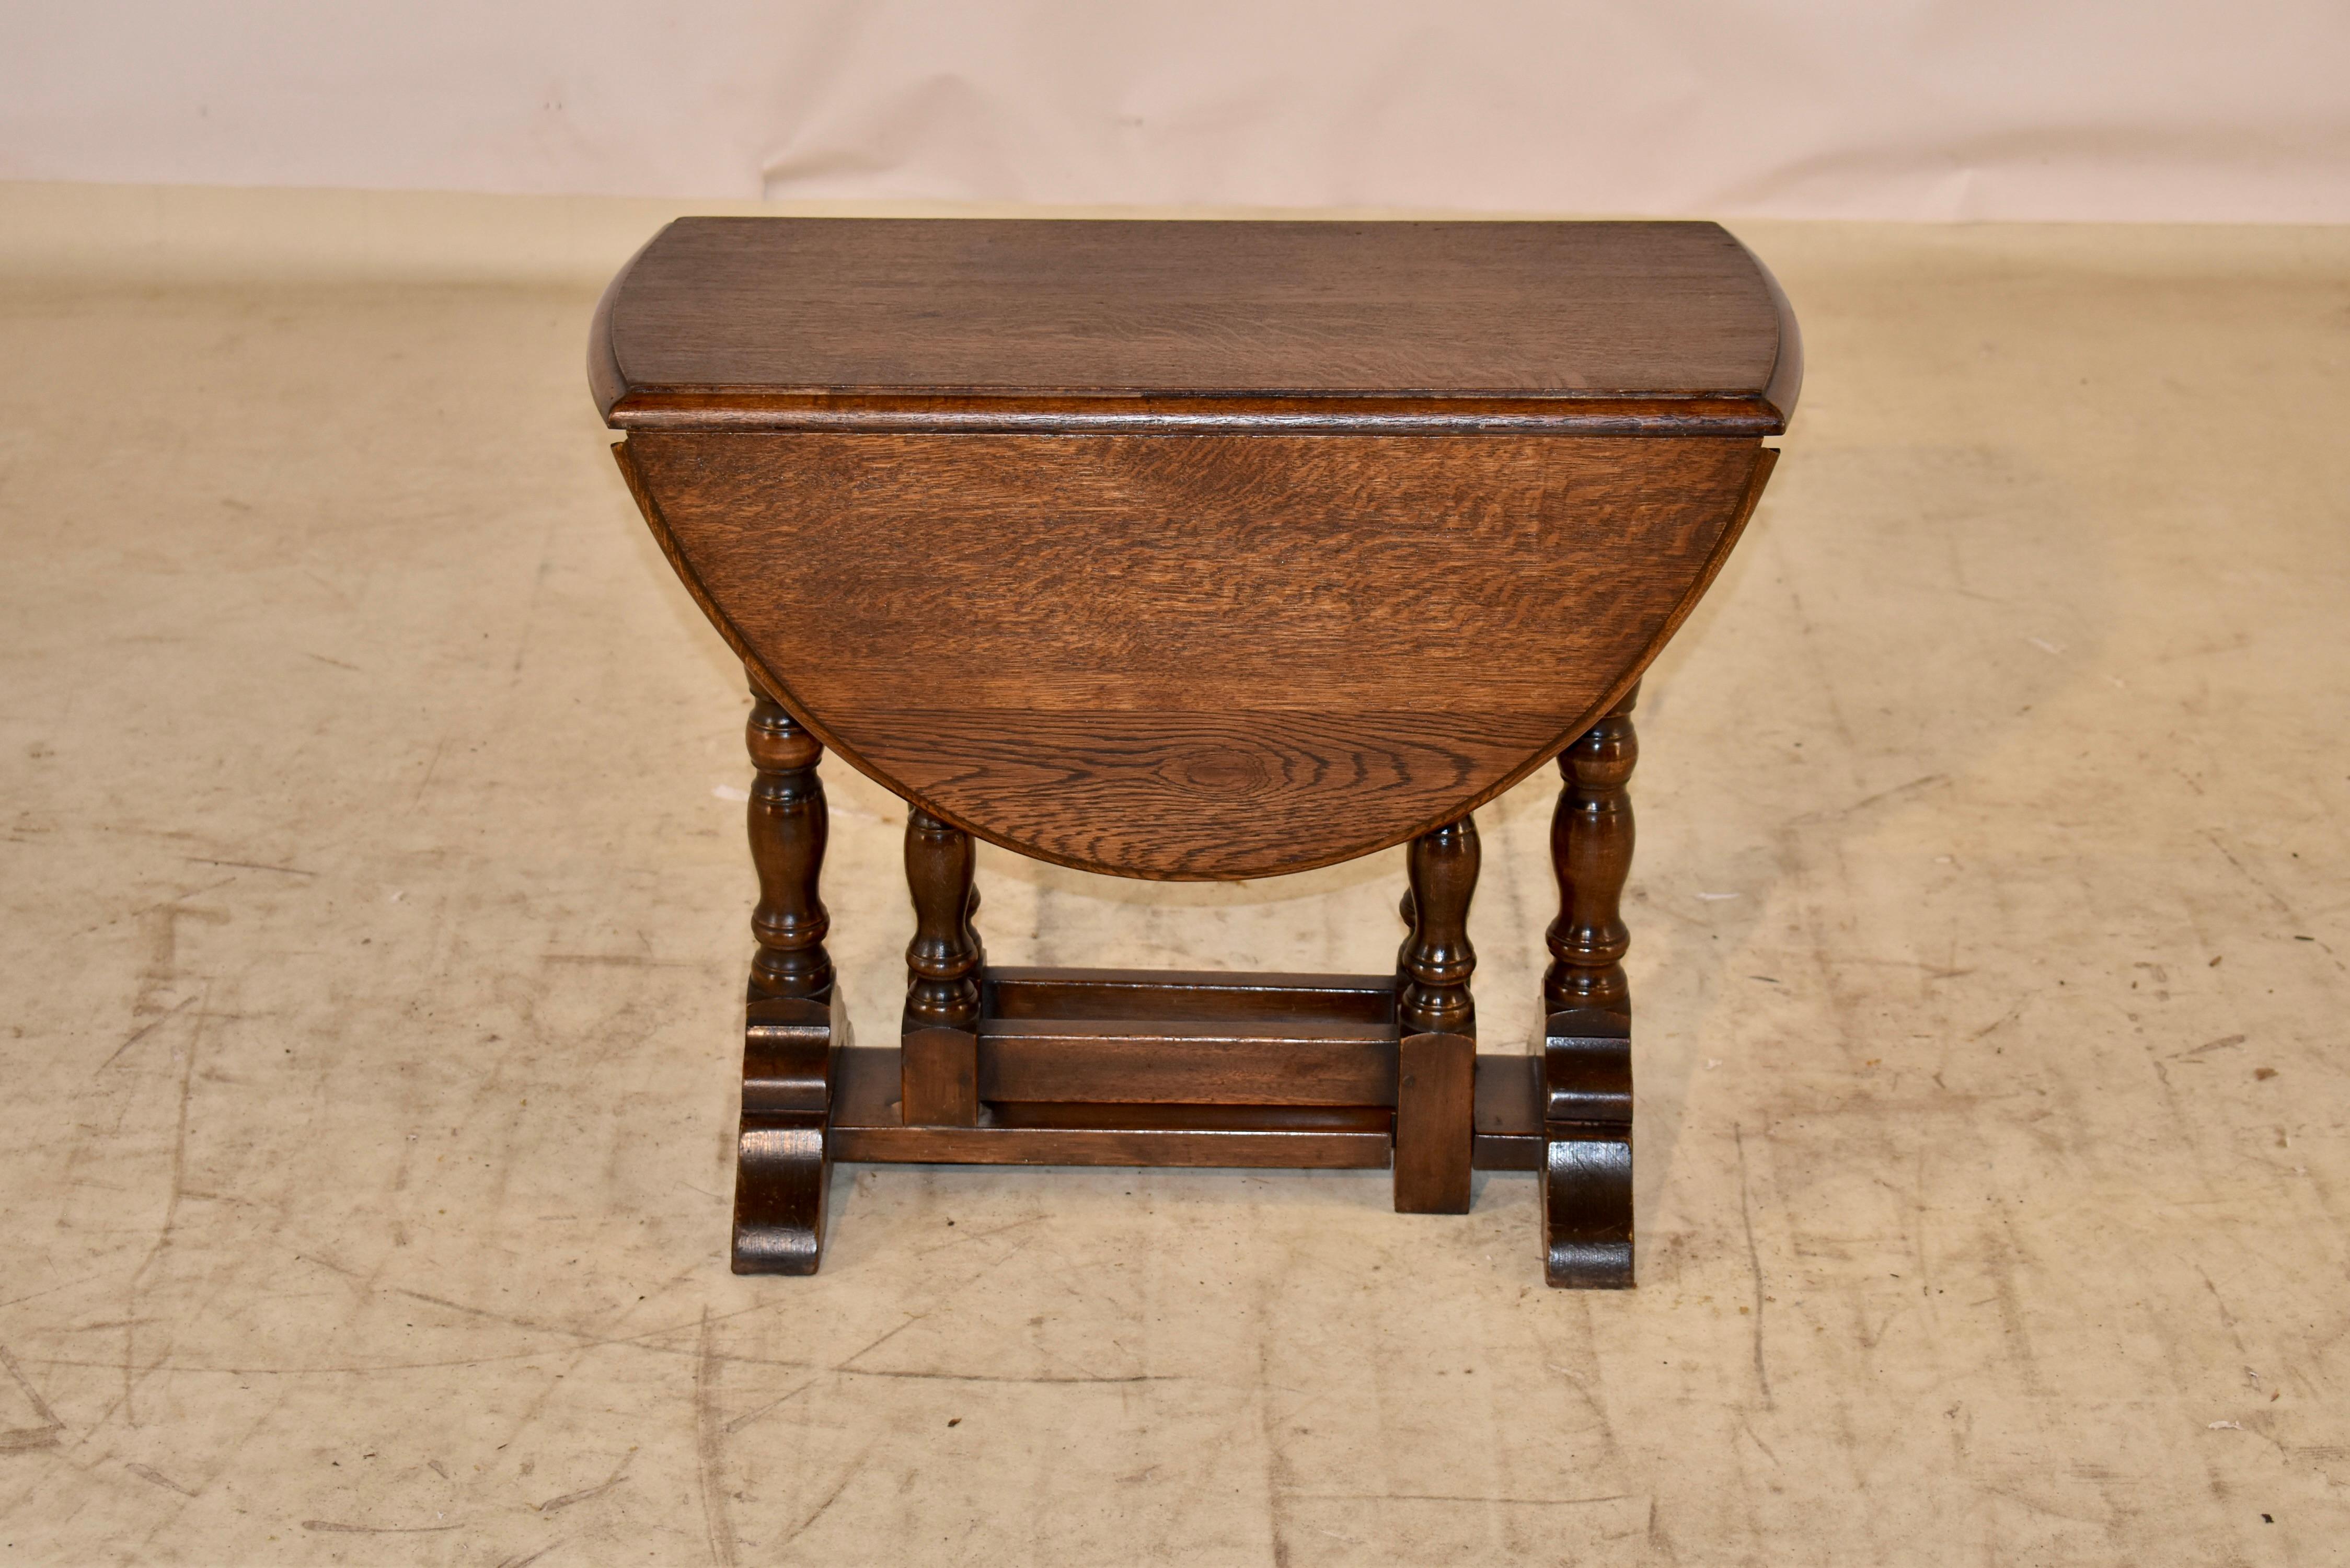 Late 19th century small oak side table with drop leaves from England.  The top has a beveled edge, and has lovely graining and patina.  When the leaves are extended, the top open measures 30 w x 24 d.  the base is a simple trestle style, with hand